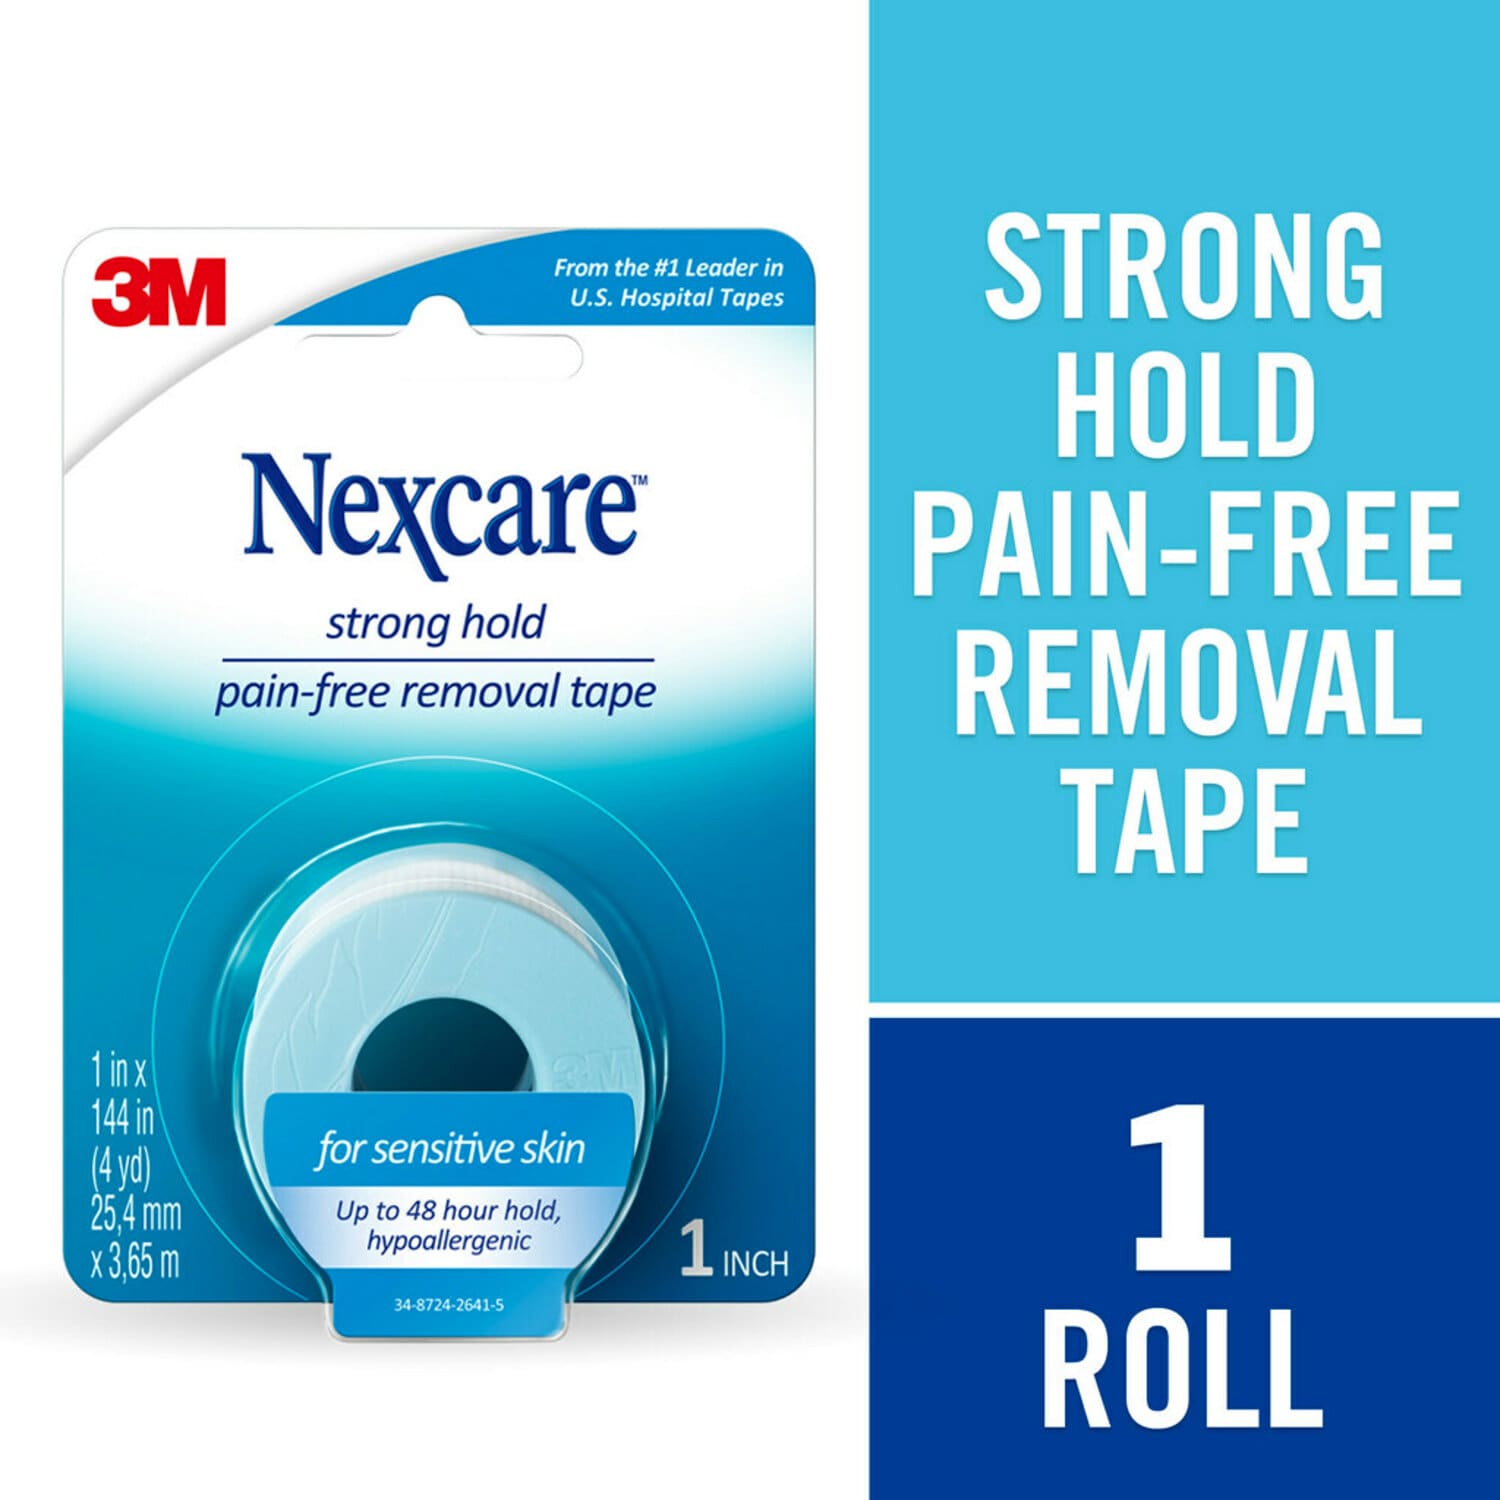 7100203442 - Nexcare Strong Hold Pain-Free Removal Tape SST-1, 1 in x 4 yd (25,4 mm
x 3,65 m)